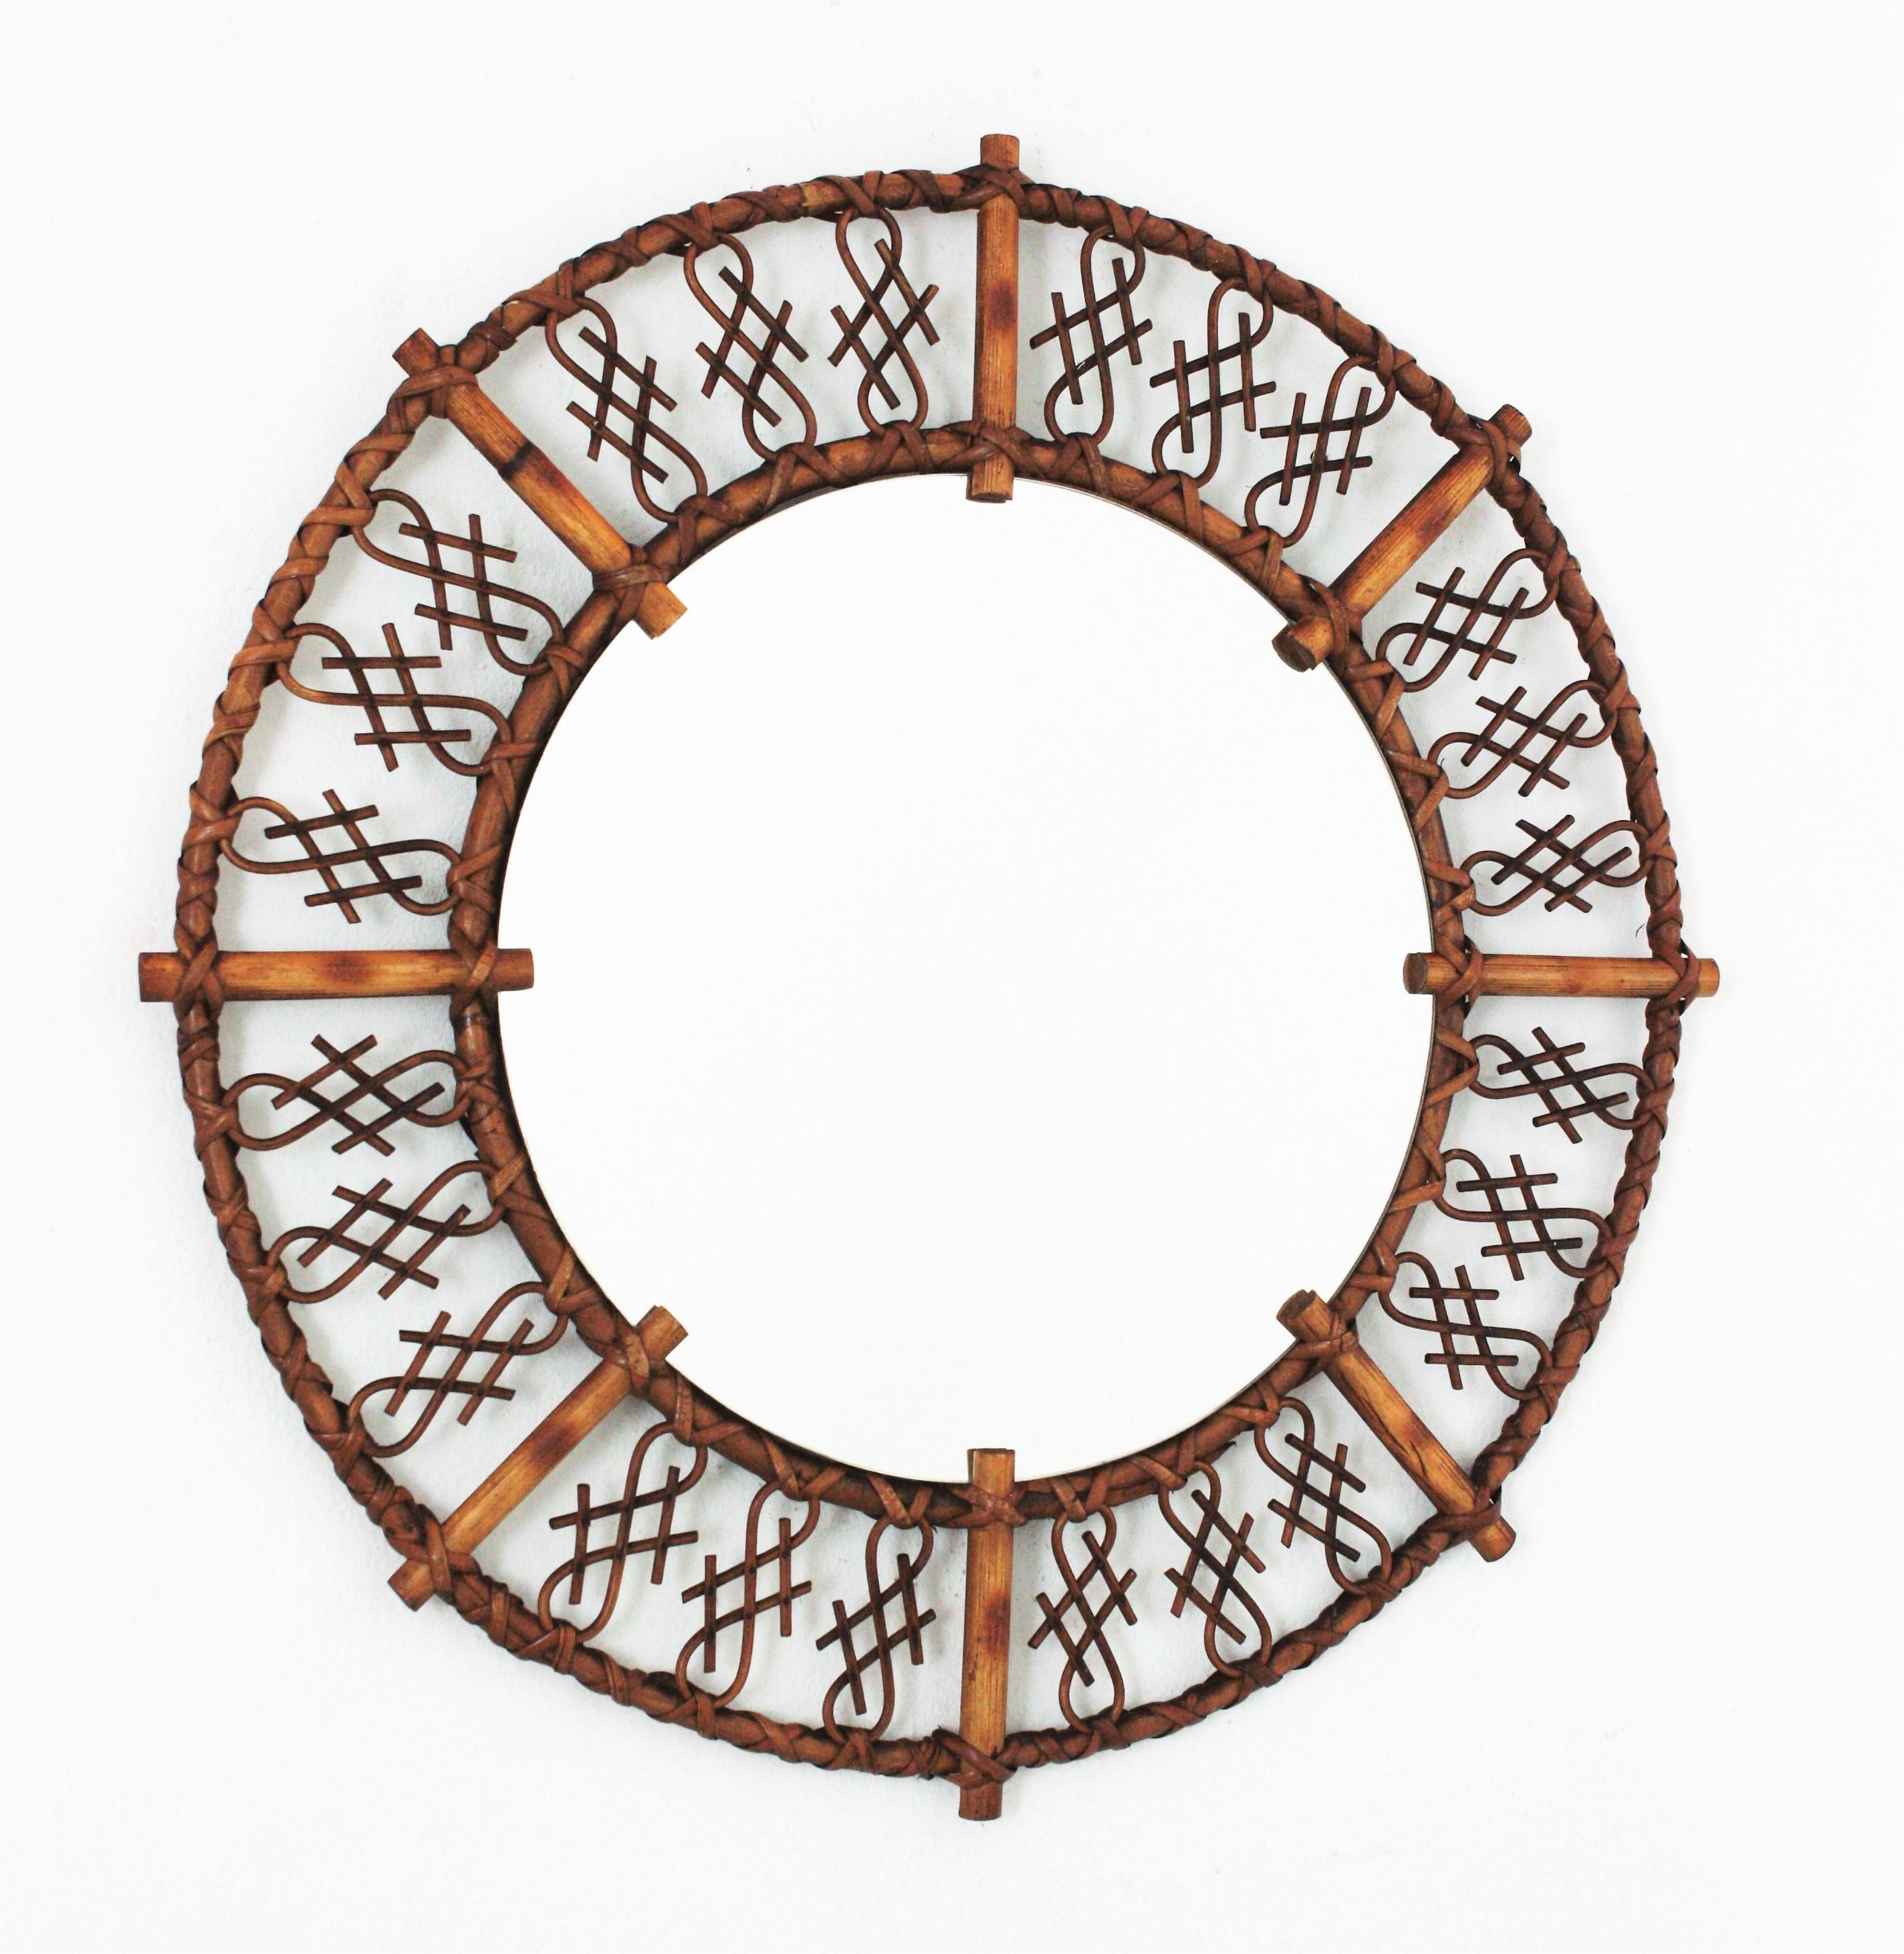 Mid-Century Modern oriental inspired round mirror, rattan and bamboo, France, 1960s.
This rattan and bamboo round mirror has a frame comprised by alternating bamboo sticks and chinoiserie details placed in sunburst disposition.
A highly decorative